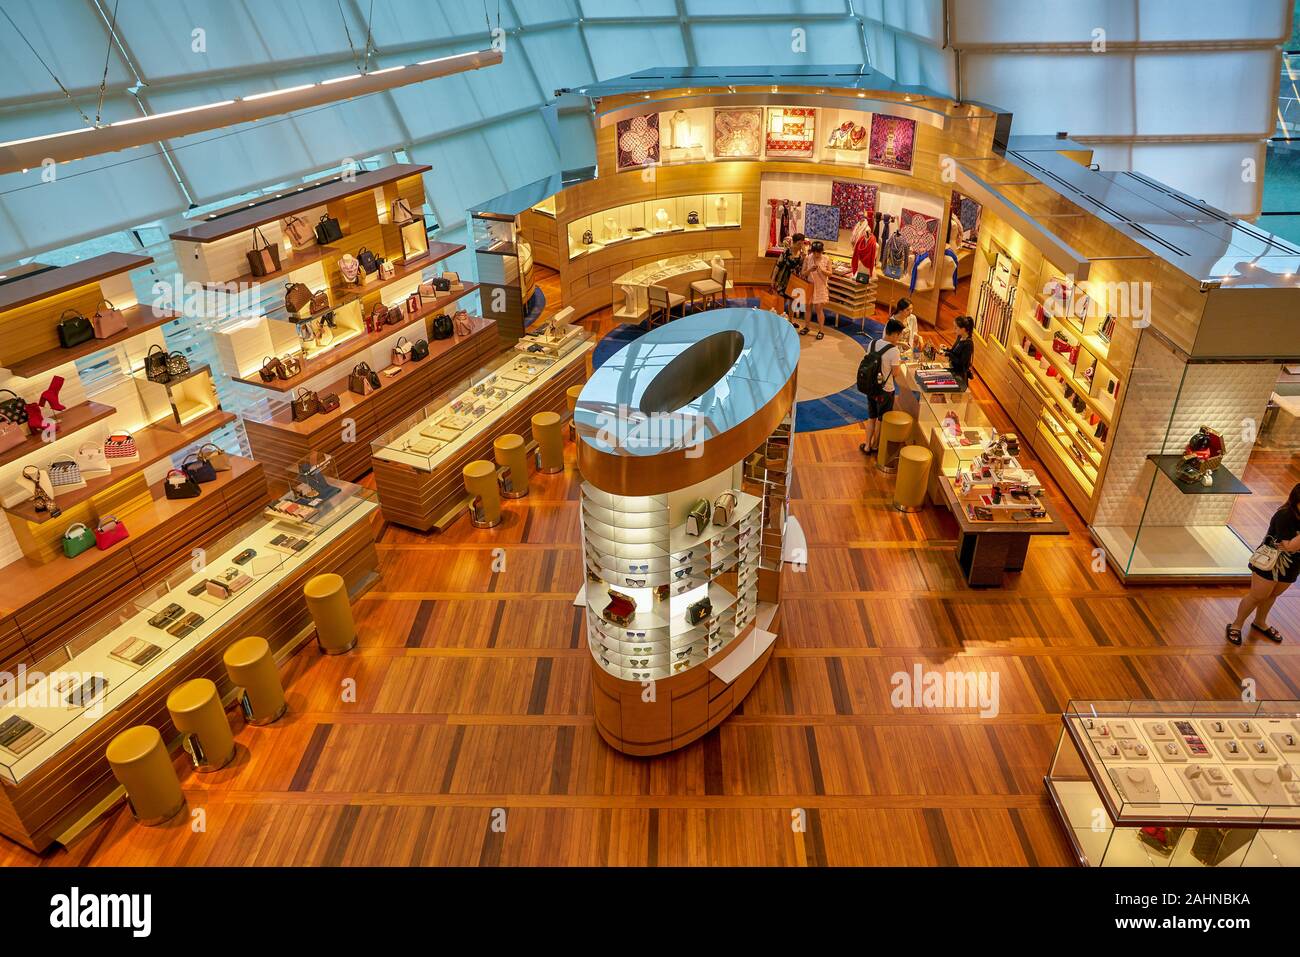 SINGAPORE - CIRCA APRIL, 2019: Interior Shot Of Louis Vuitton Store In  Changi International Airport. Stock Photo, Picture and Royalty Free Image.  Image 135603084.